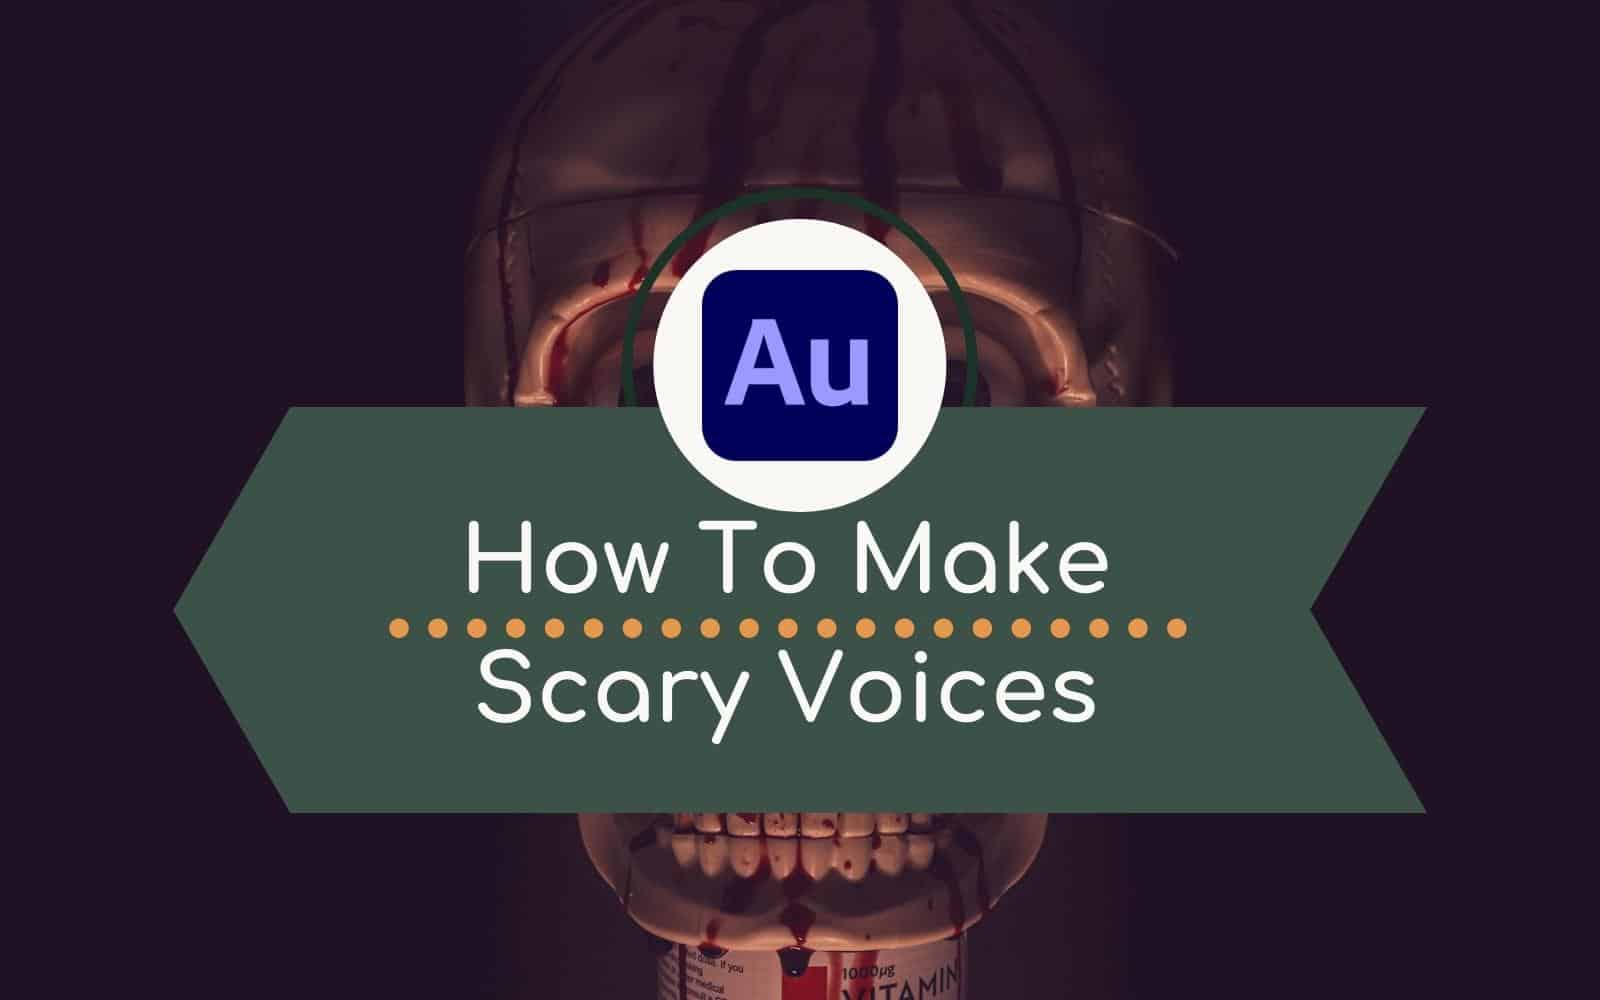 How To Make Scary Voices In Adobe Audition Audio Editing scary voices Music Radio Creative